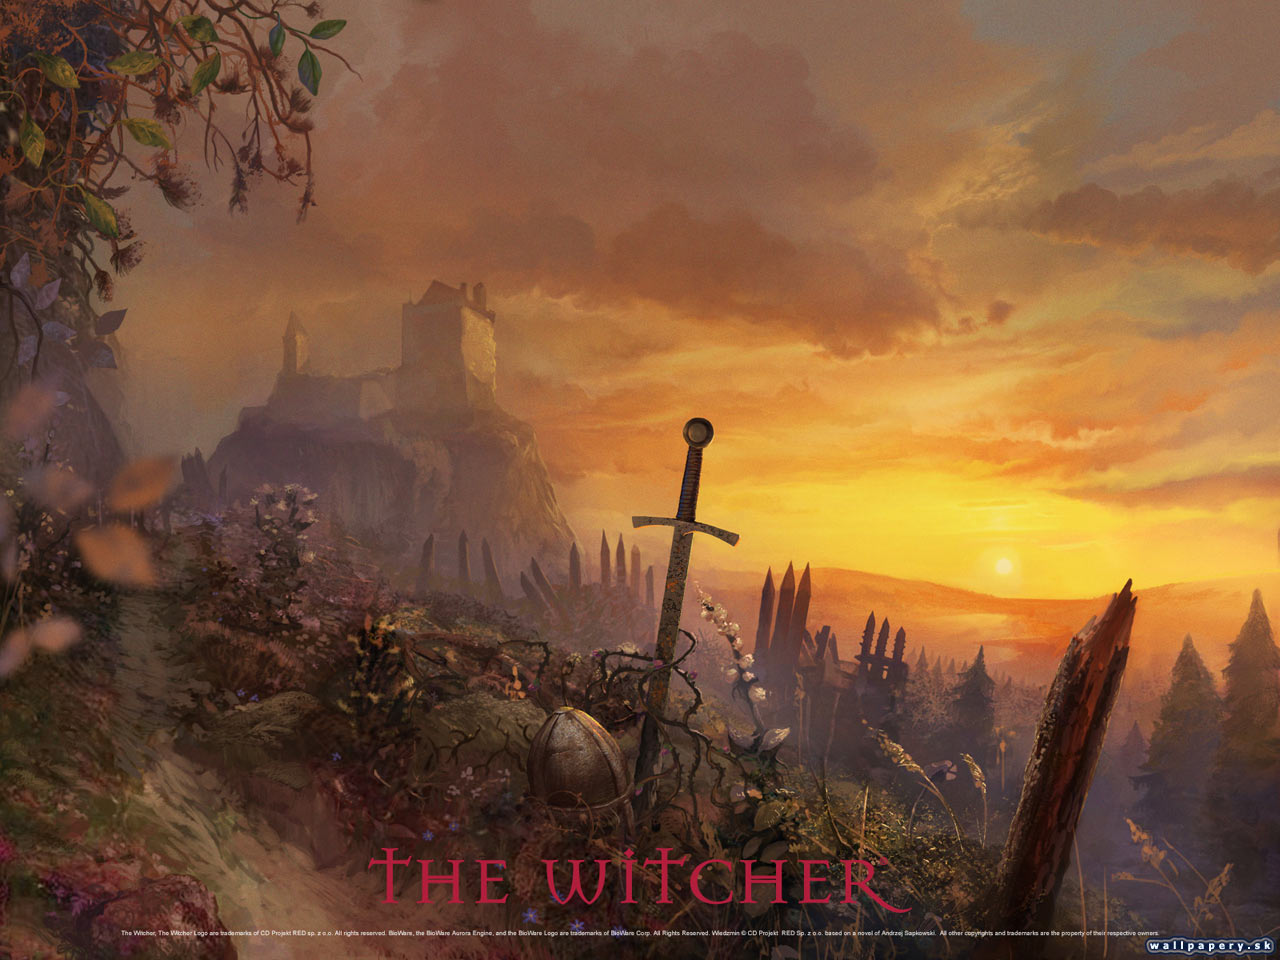 The Witcher - wallpaper 8